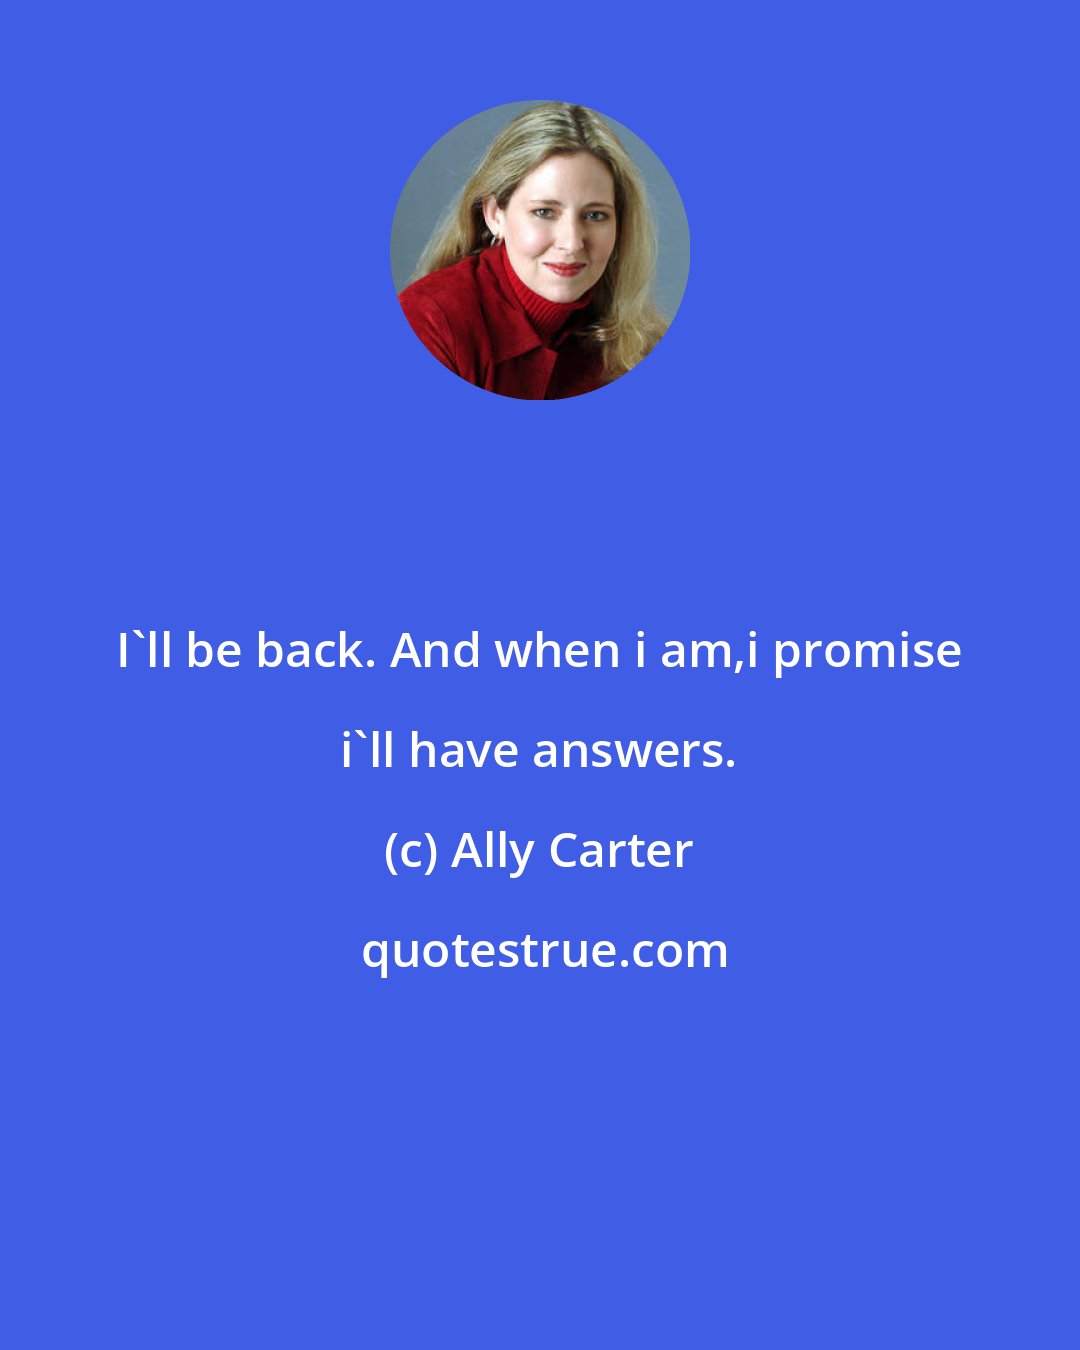 Ally Carter: I'll be back. And when i am,i promise i'll have answers.